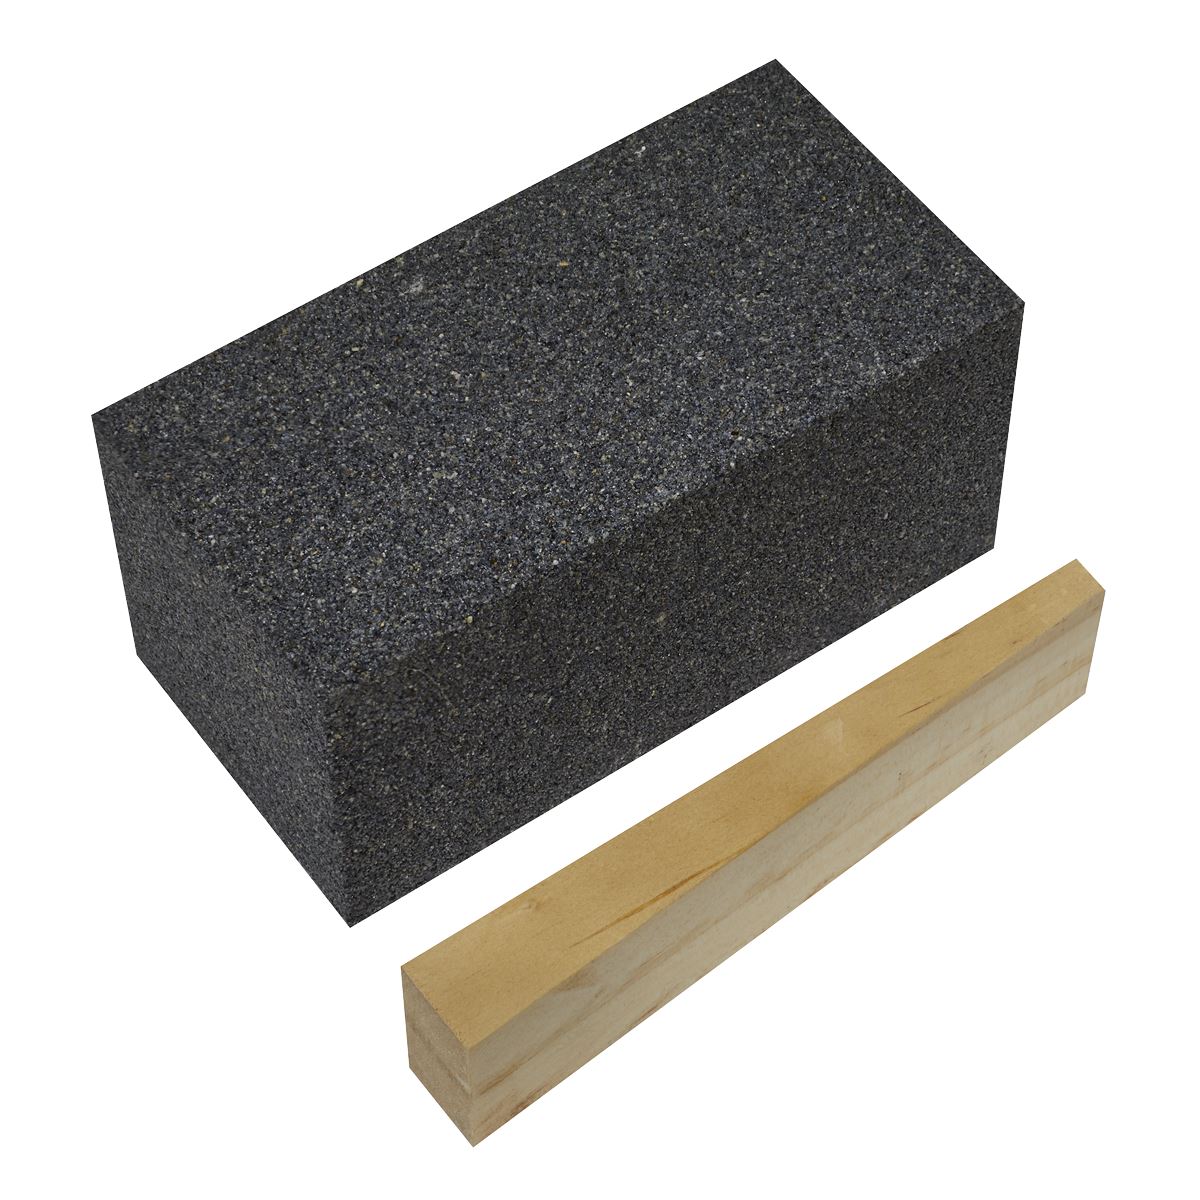 Worksafe by Sealey Floor Grinding Block 50 x 50 x 100mm 24Grit - Pack of 6